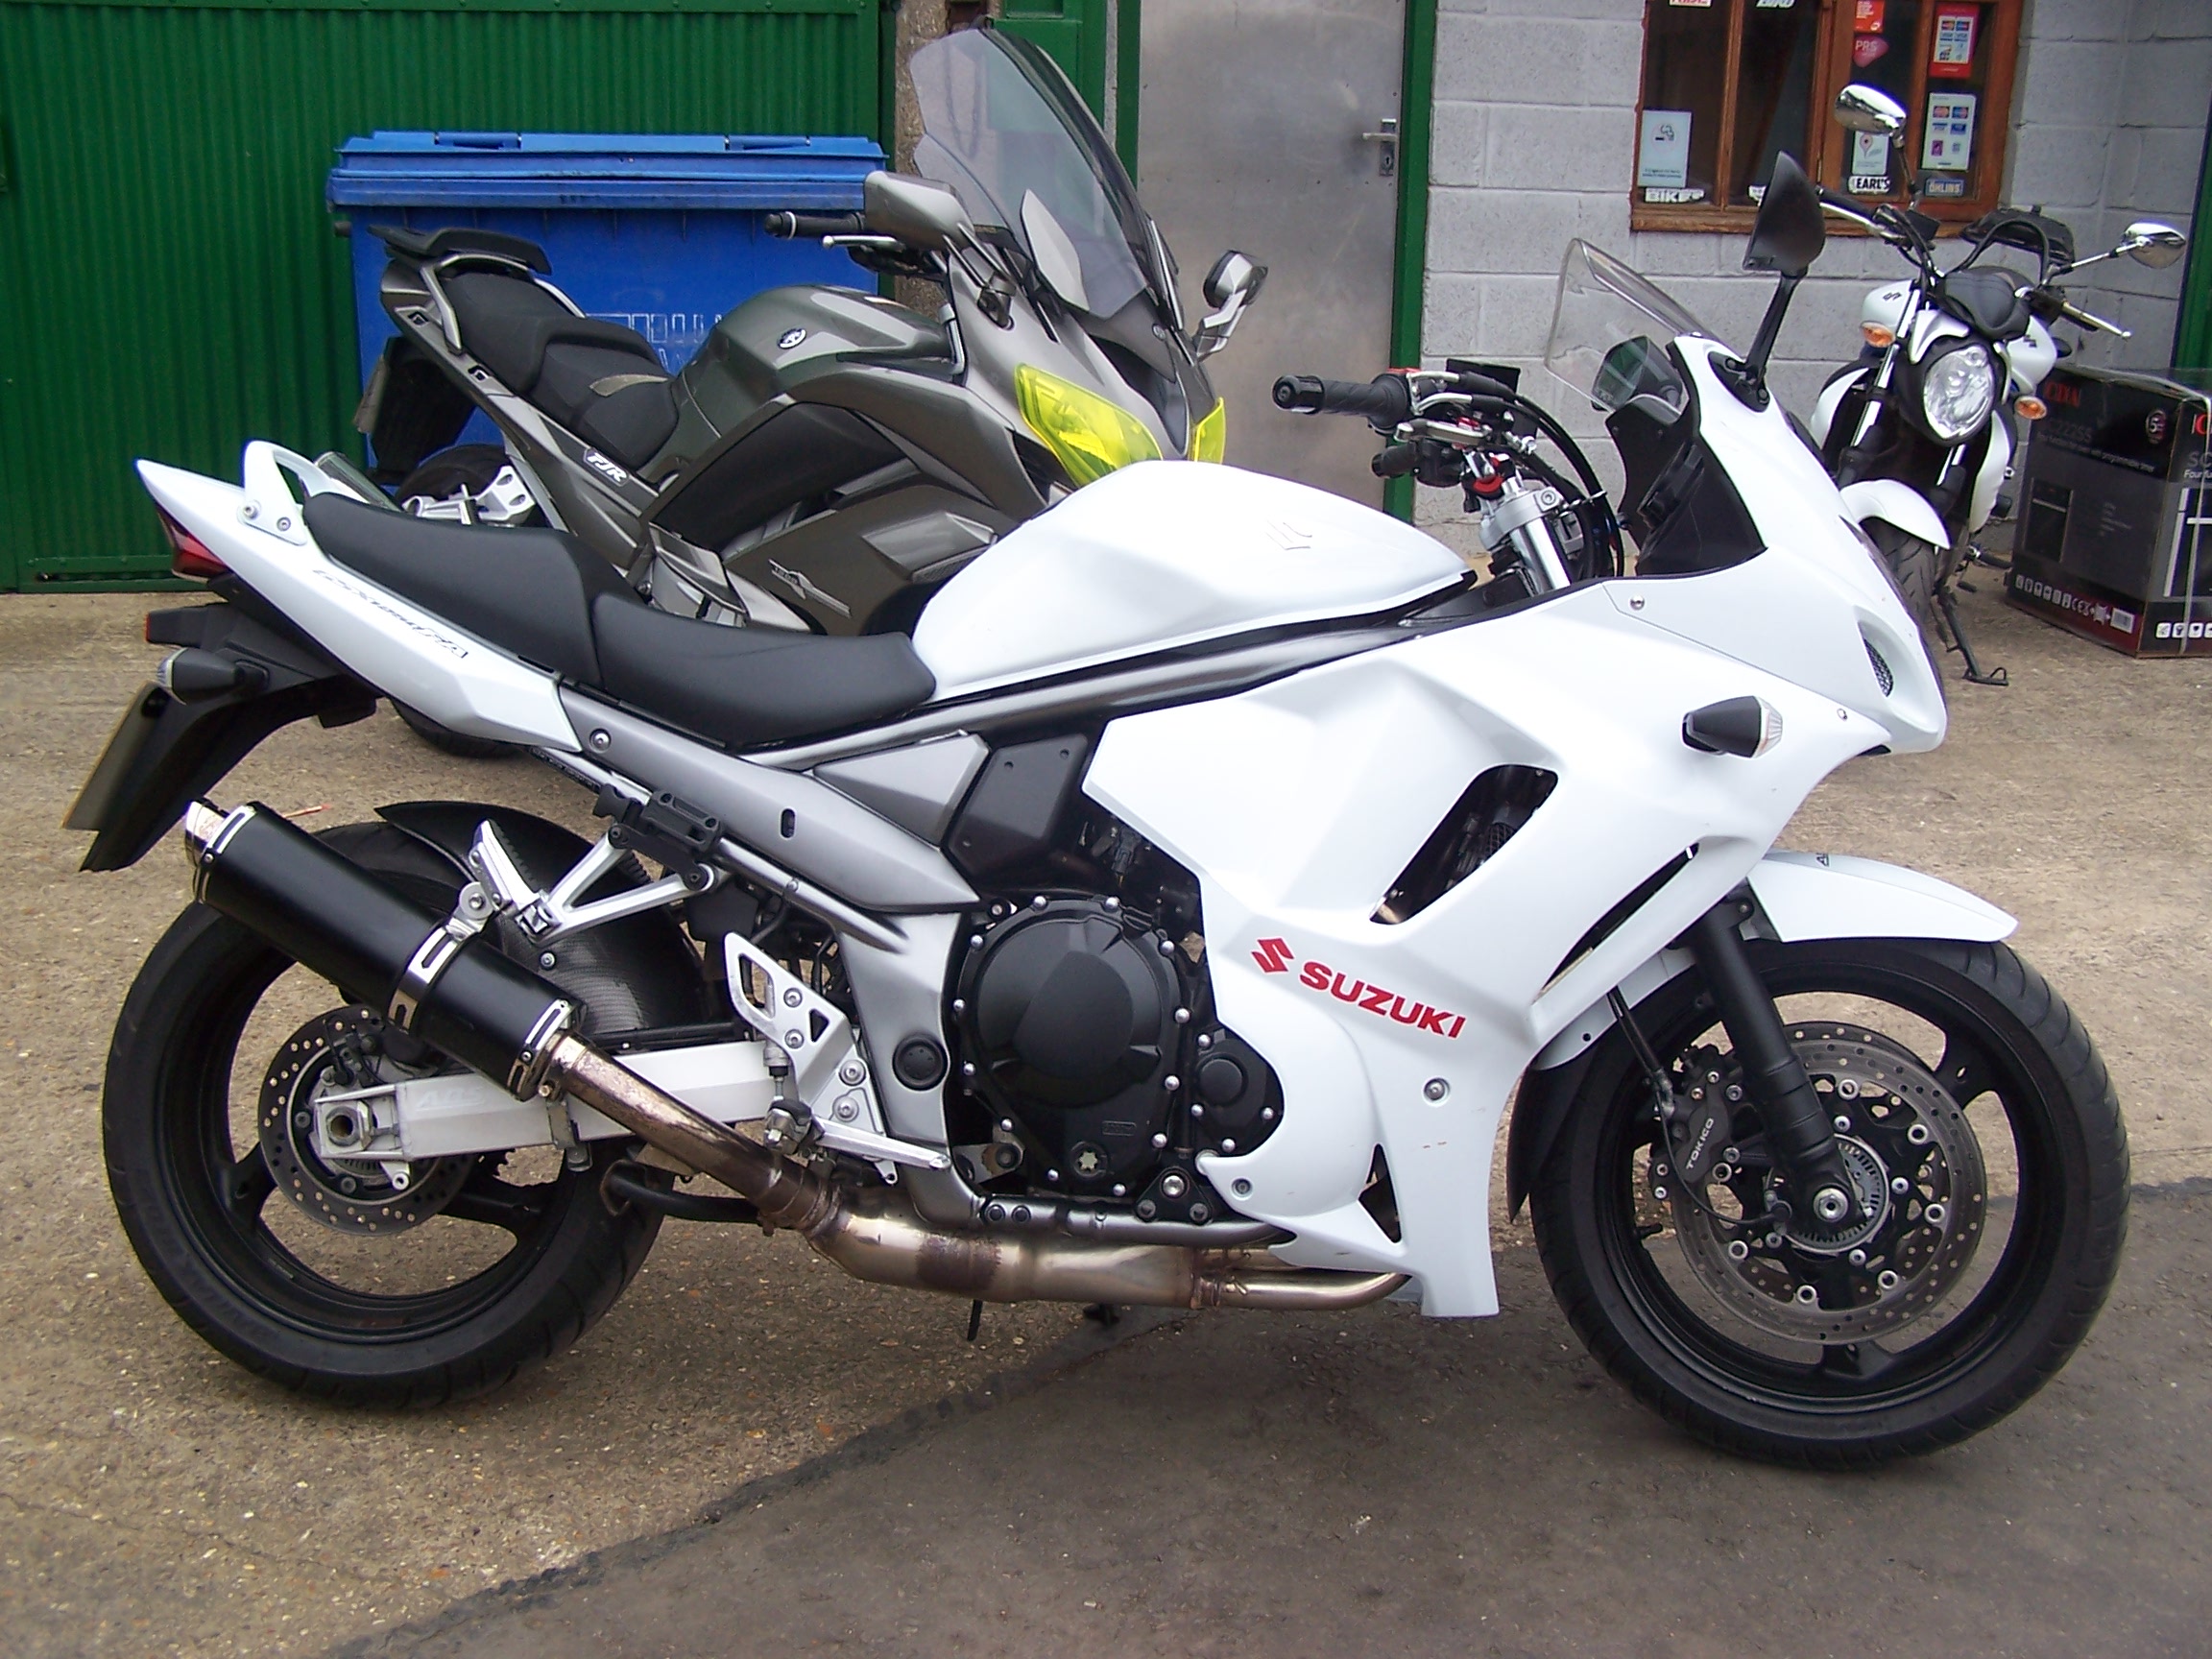 2012 Suzuki GSX1250FA ECU remap – 98 to 112bhp with a solid top-end power delivery